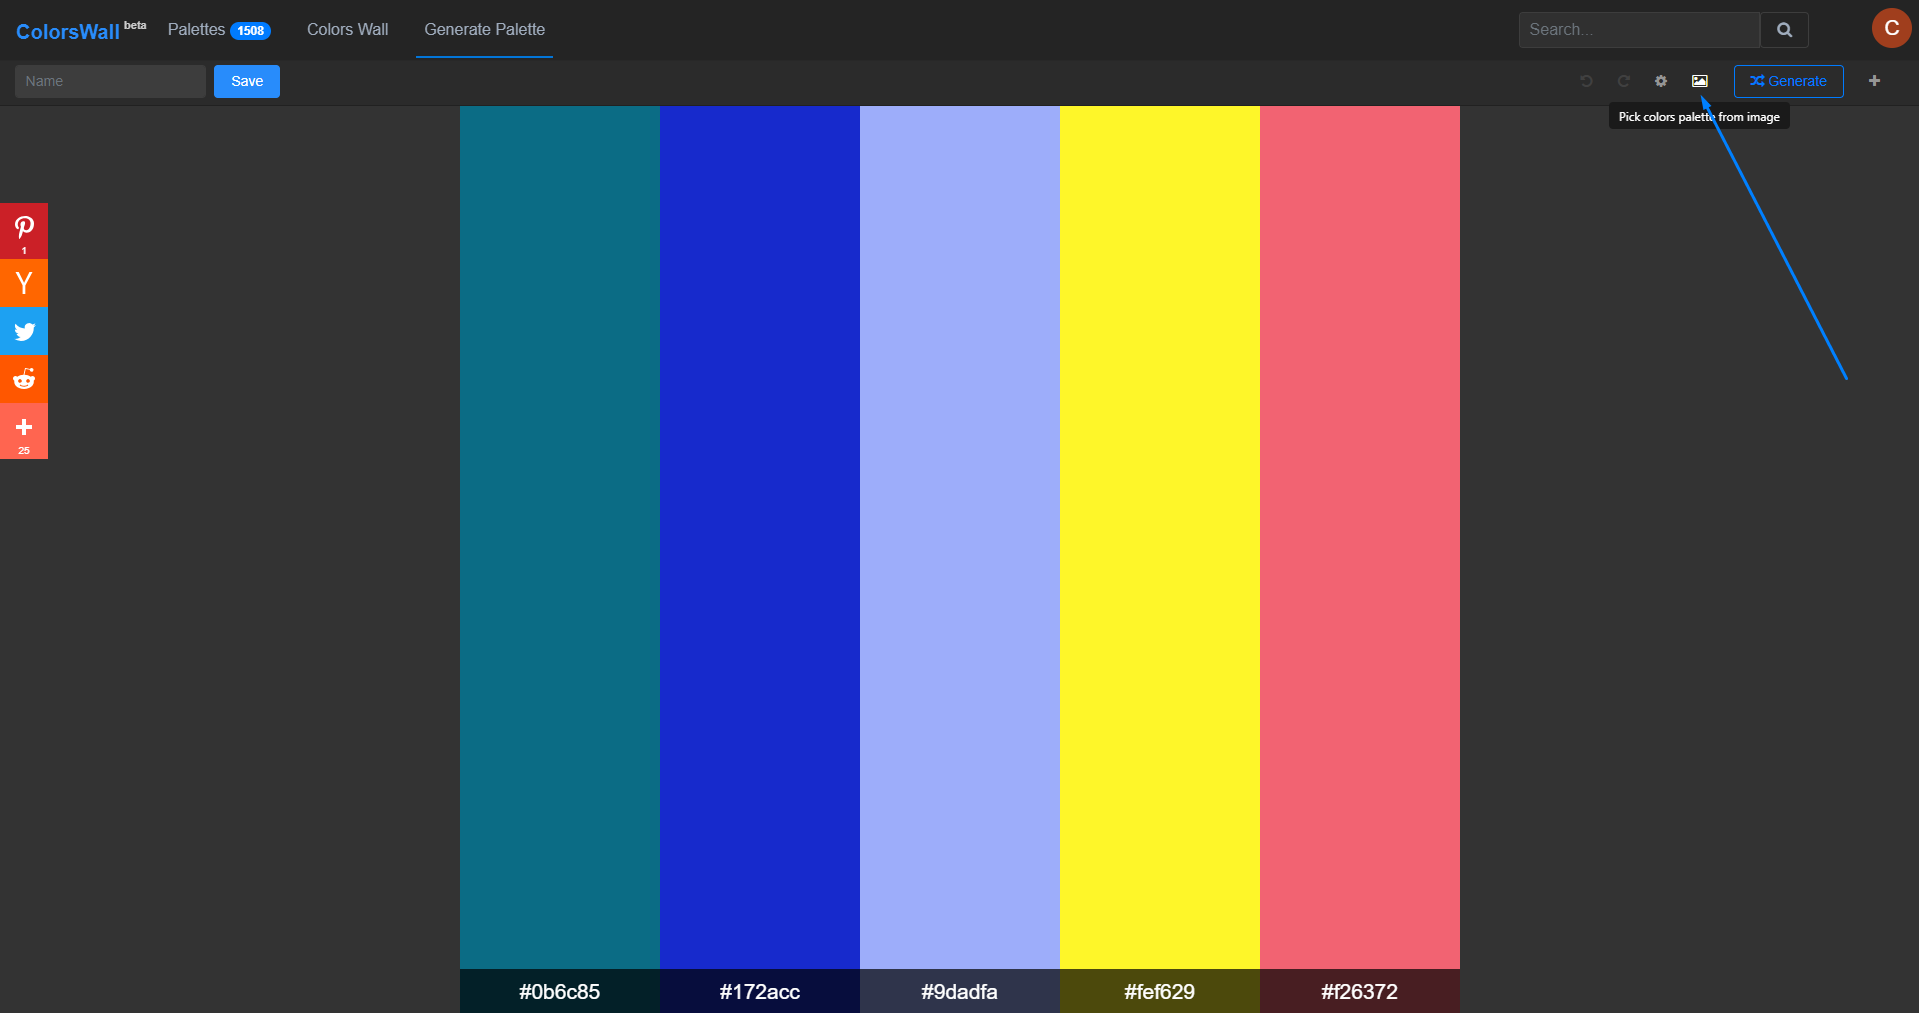 Generate colors palette from an image